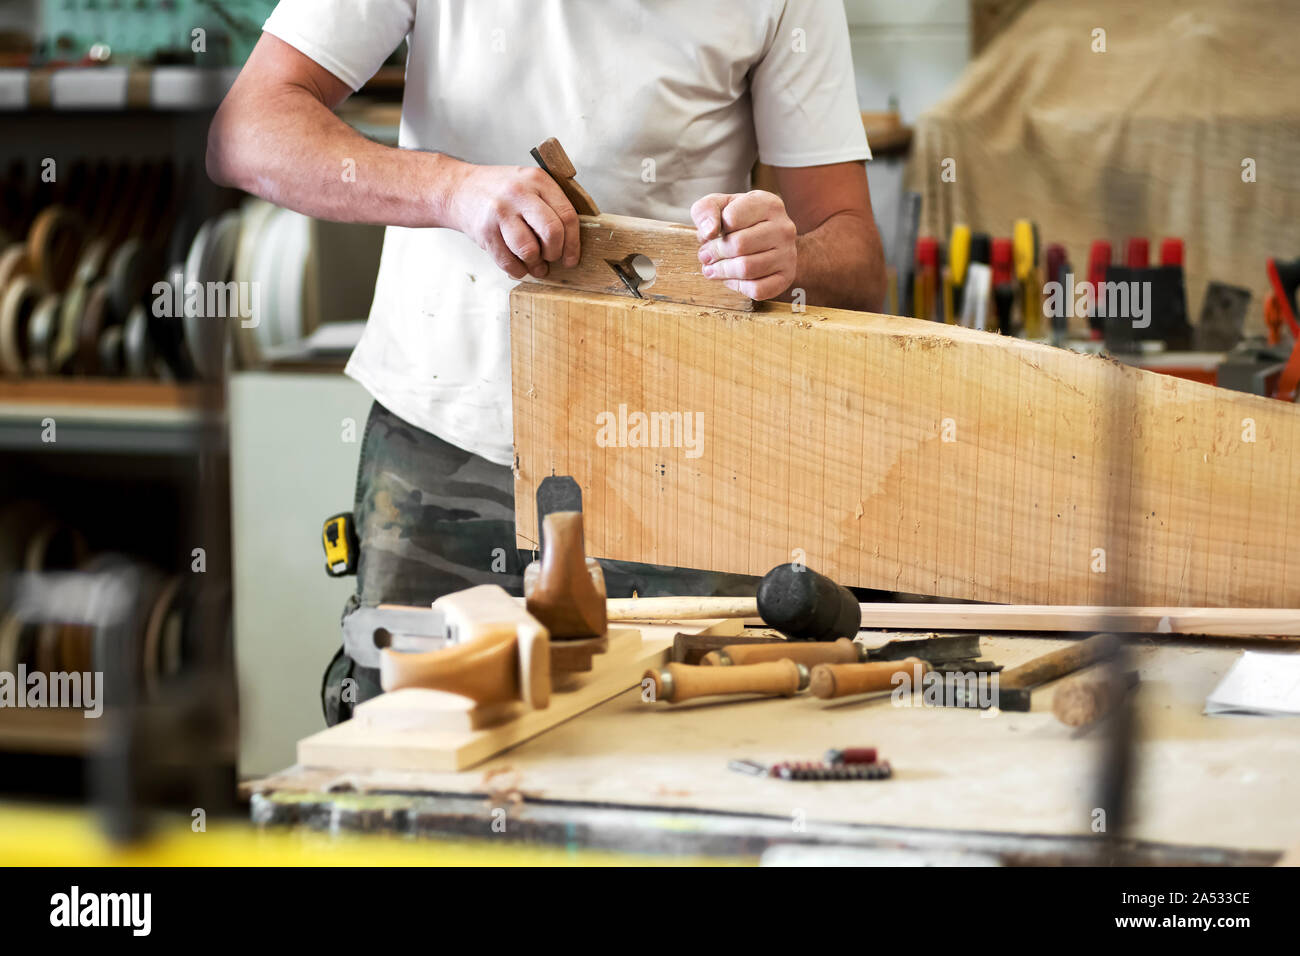 Carpenter planing a wooden block with a manual planer smoothing or reducing the surface with assorted tools in the foreground in a woodworking worksho Stock Photo